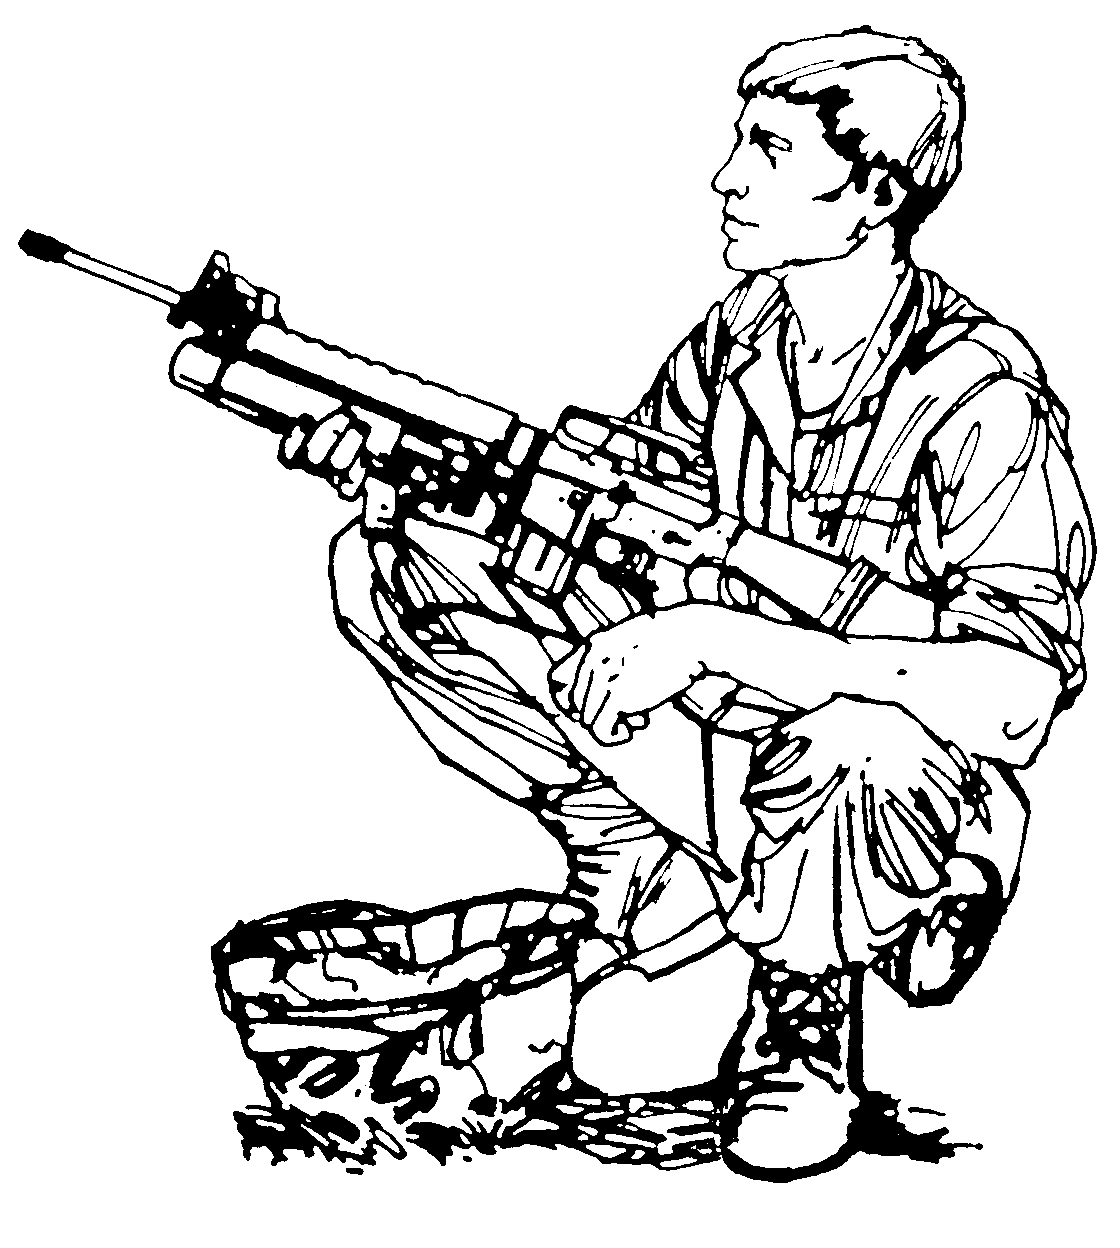 1-14a soldier with M16/M203 squatting by helmet